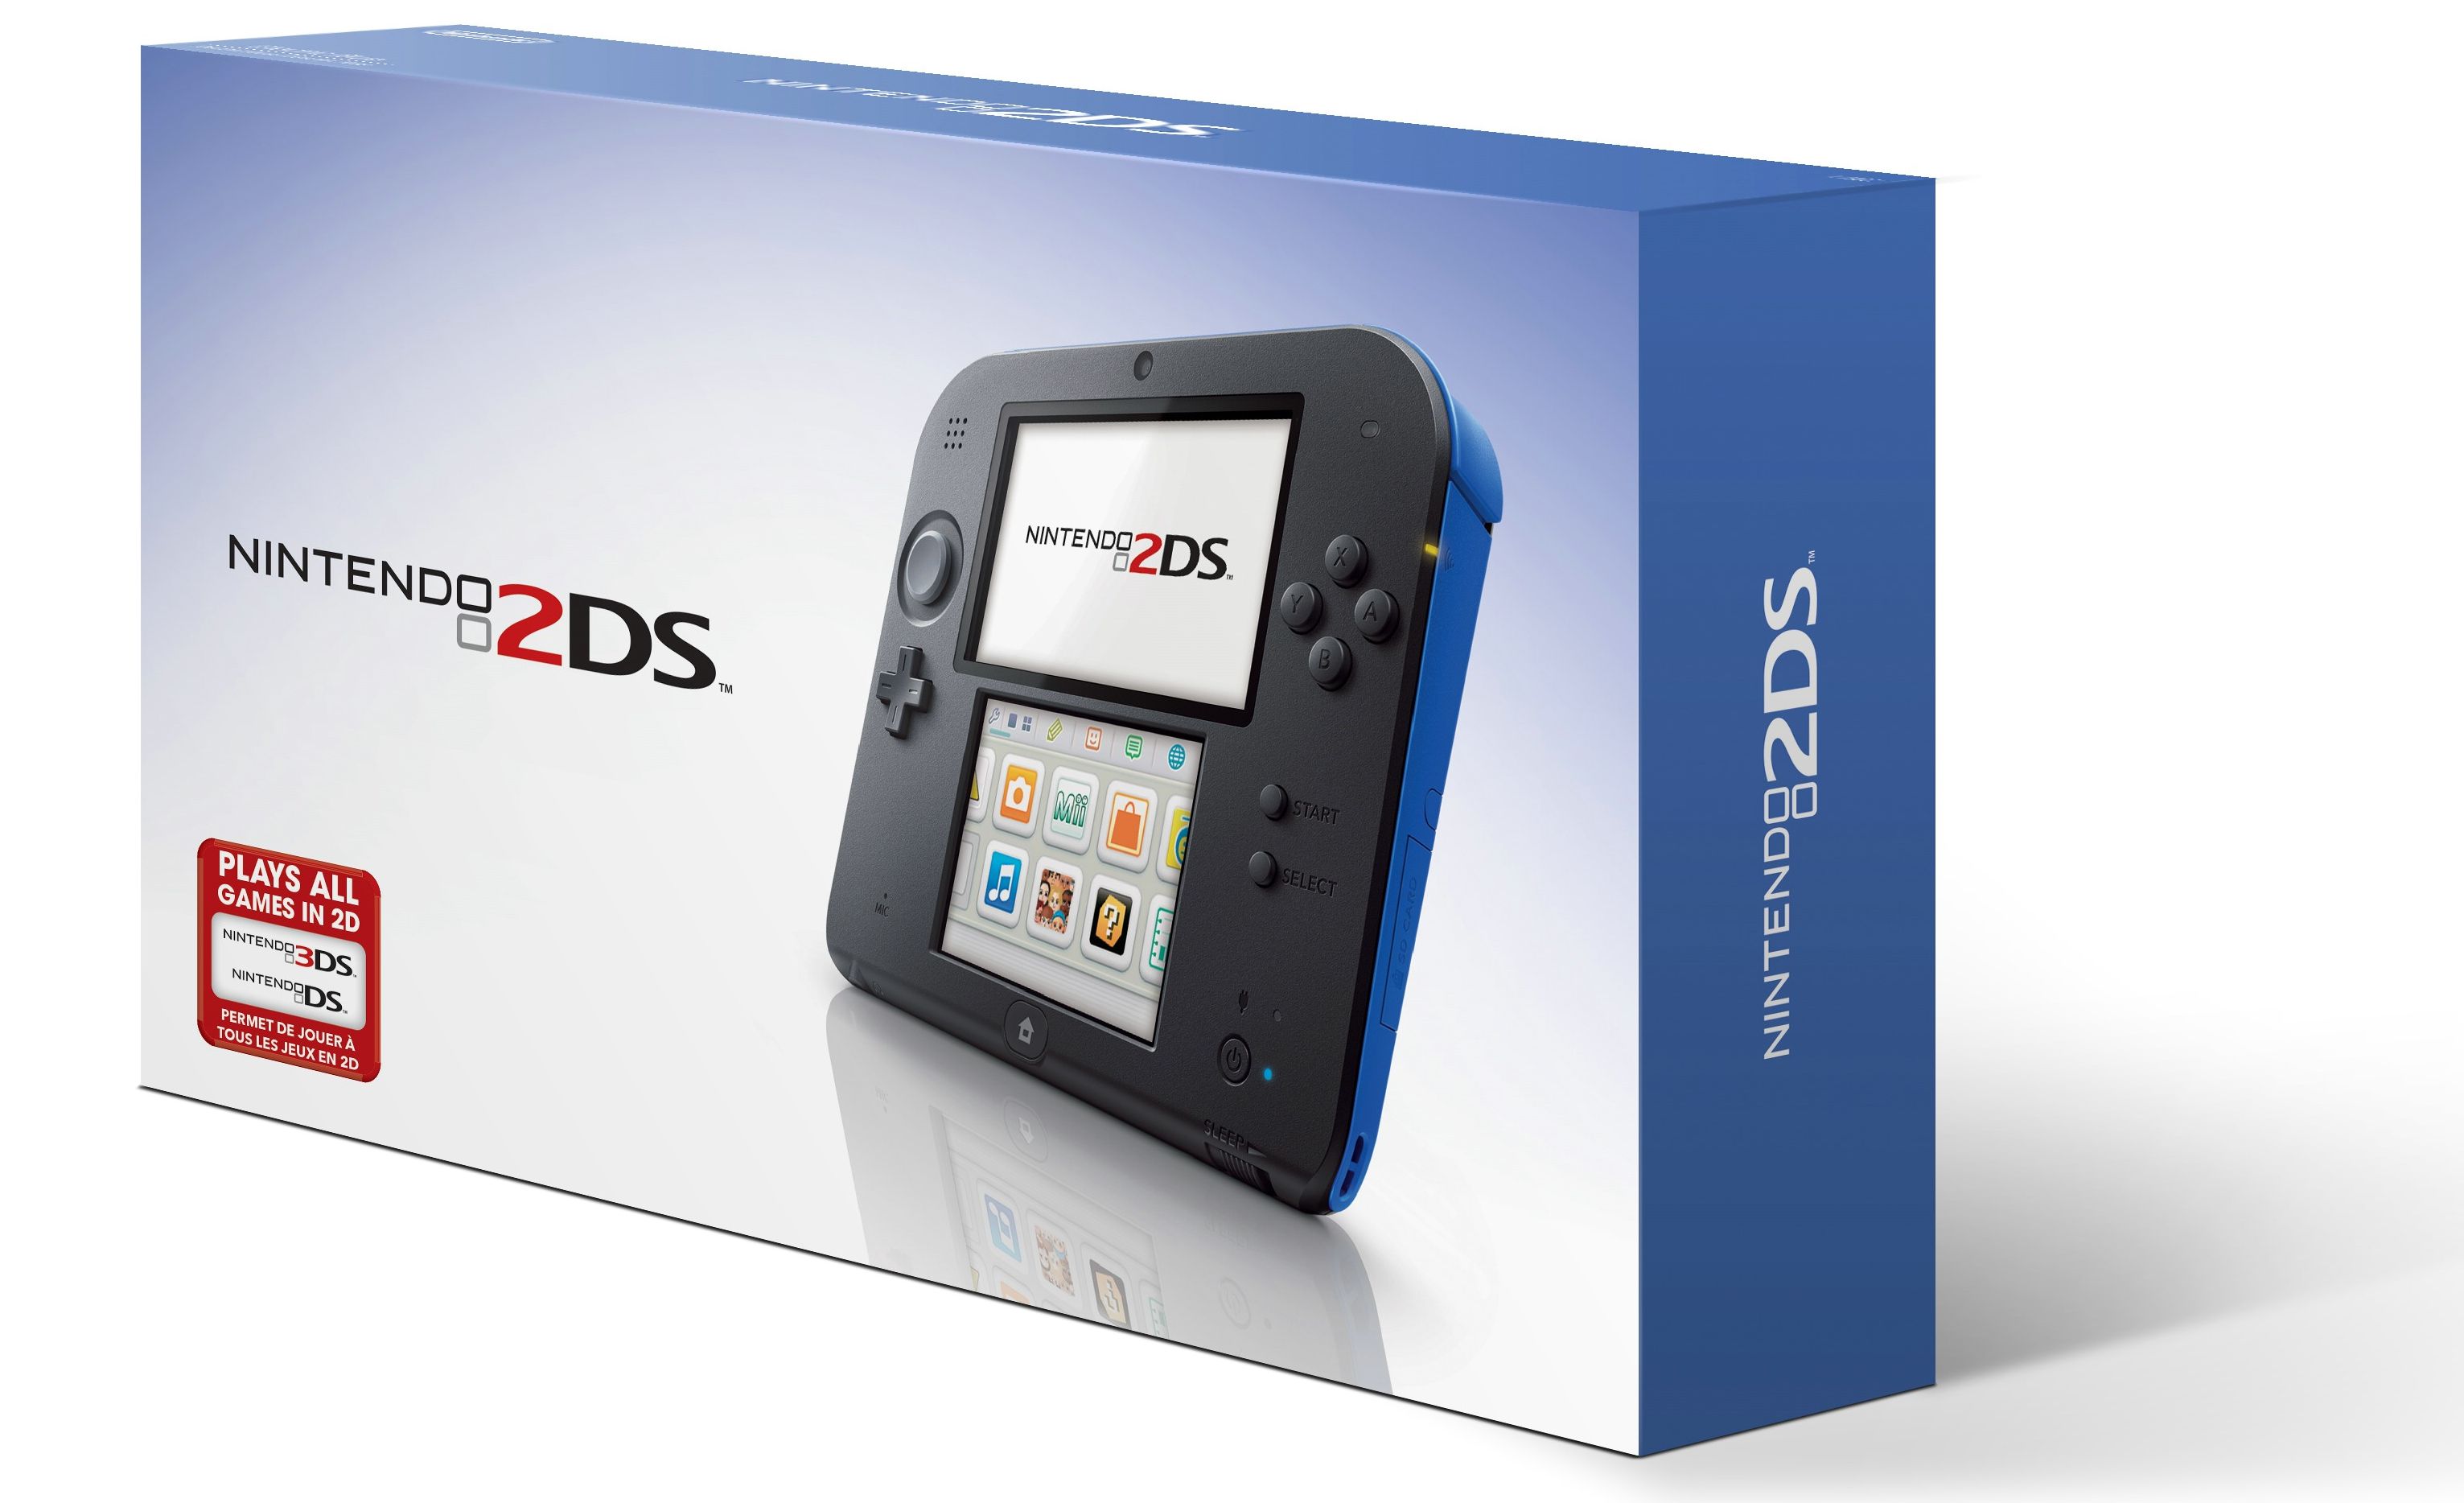 Nintendo reveal new 2DS console